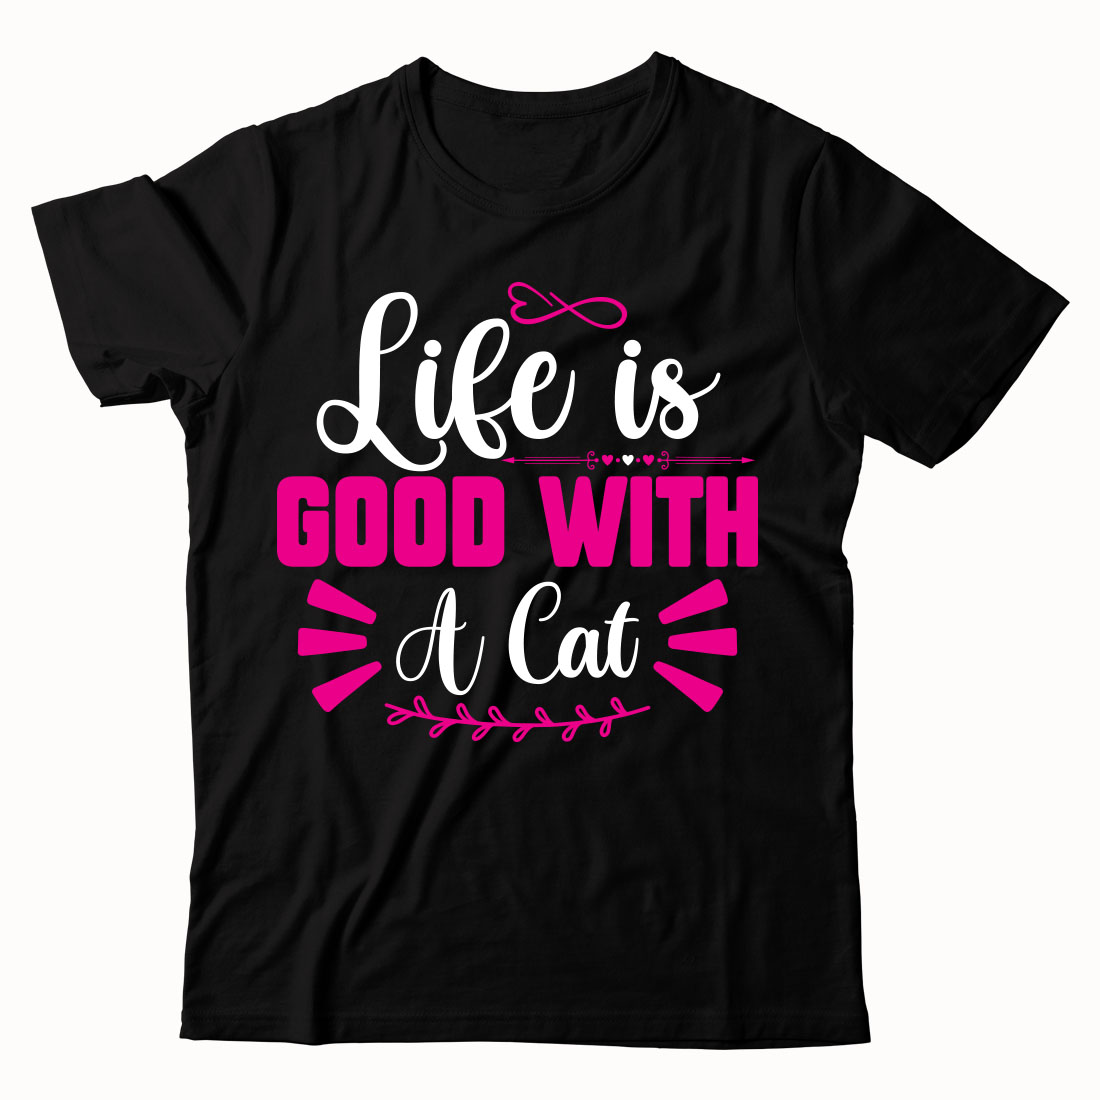 Black t - shirt with pink lettering that says life is good with a cat.